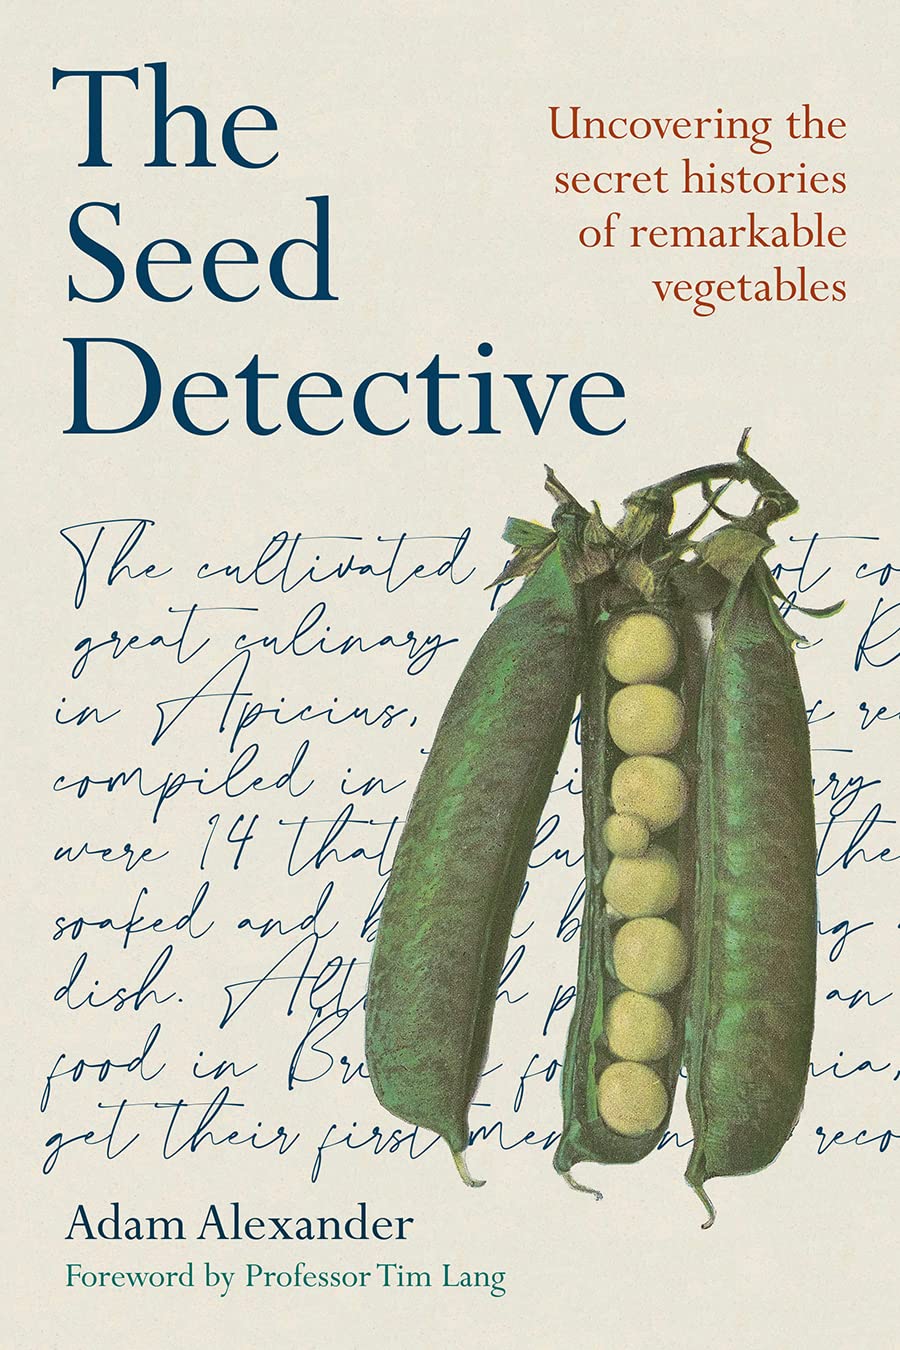 Image for "The Seed Detective"